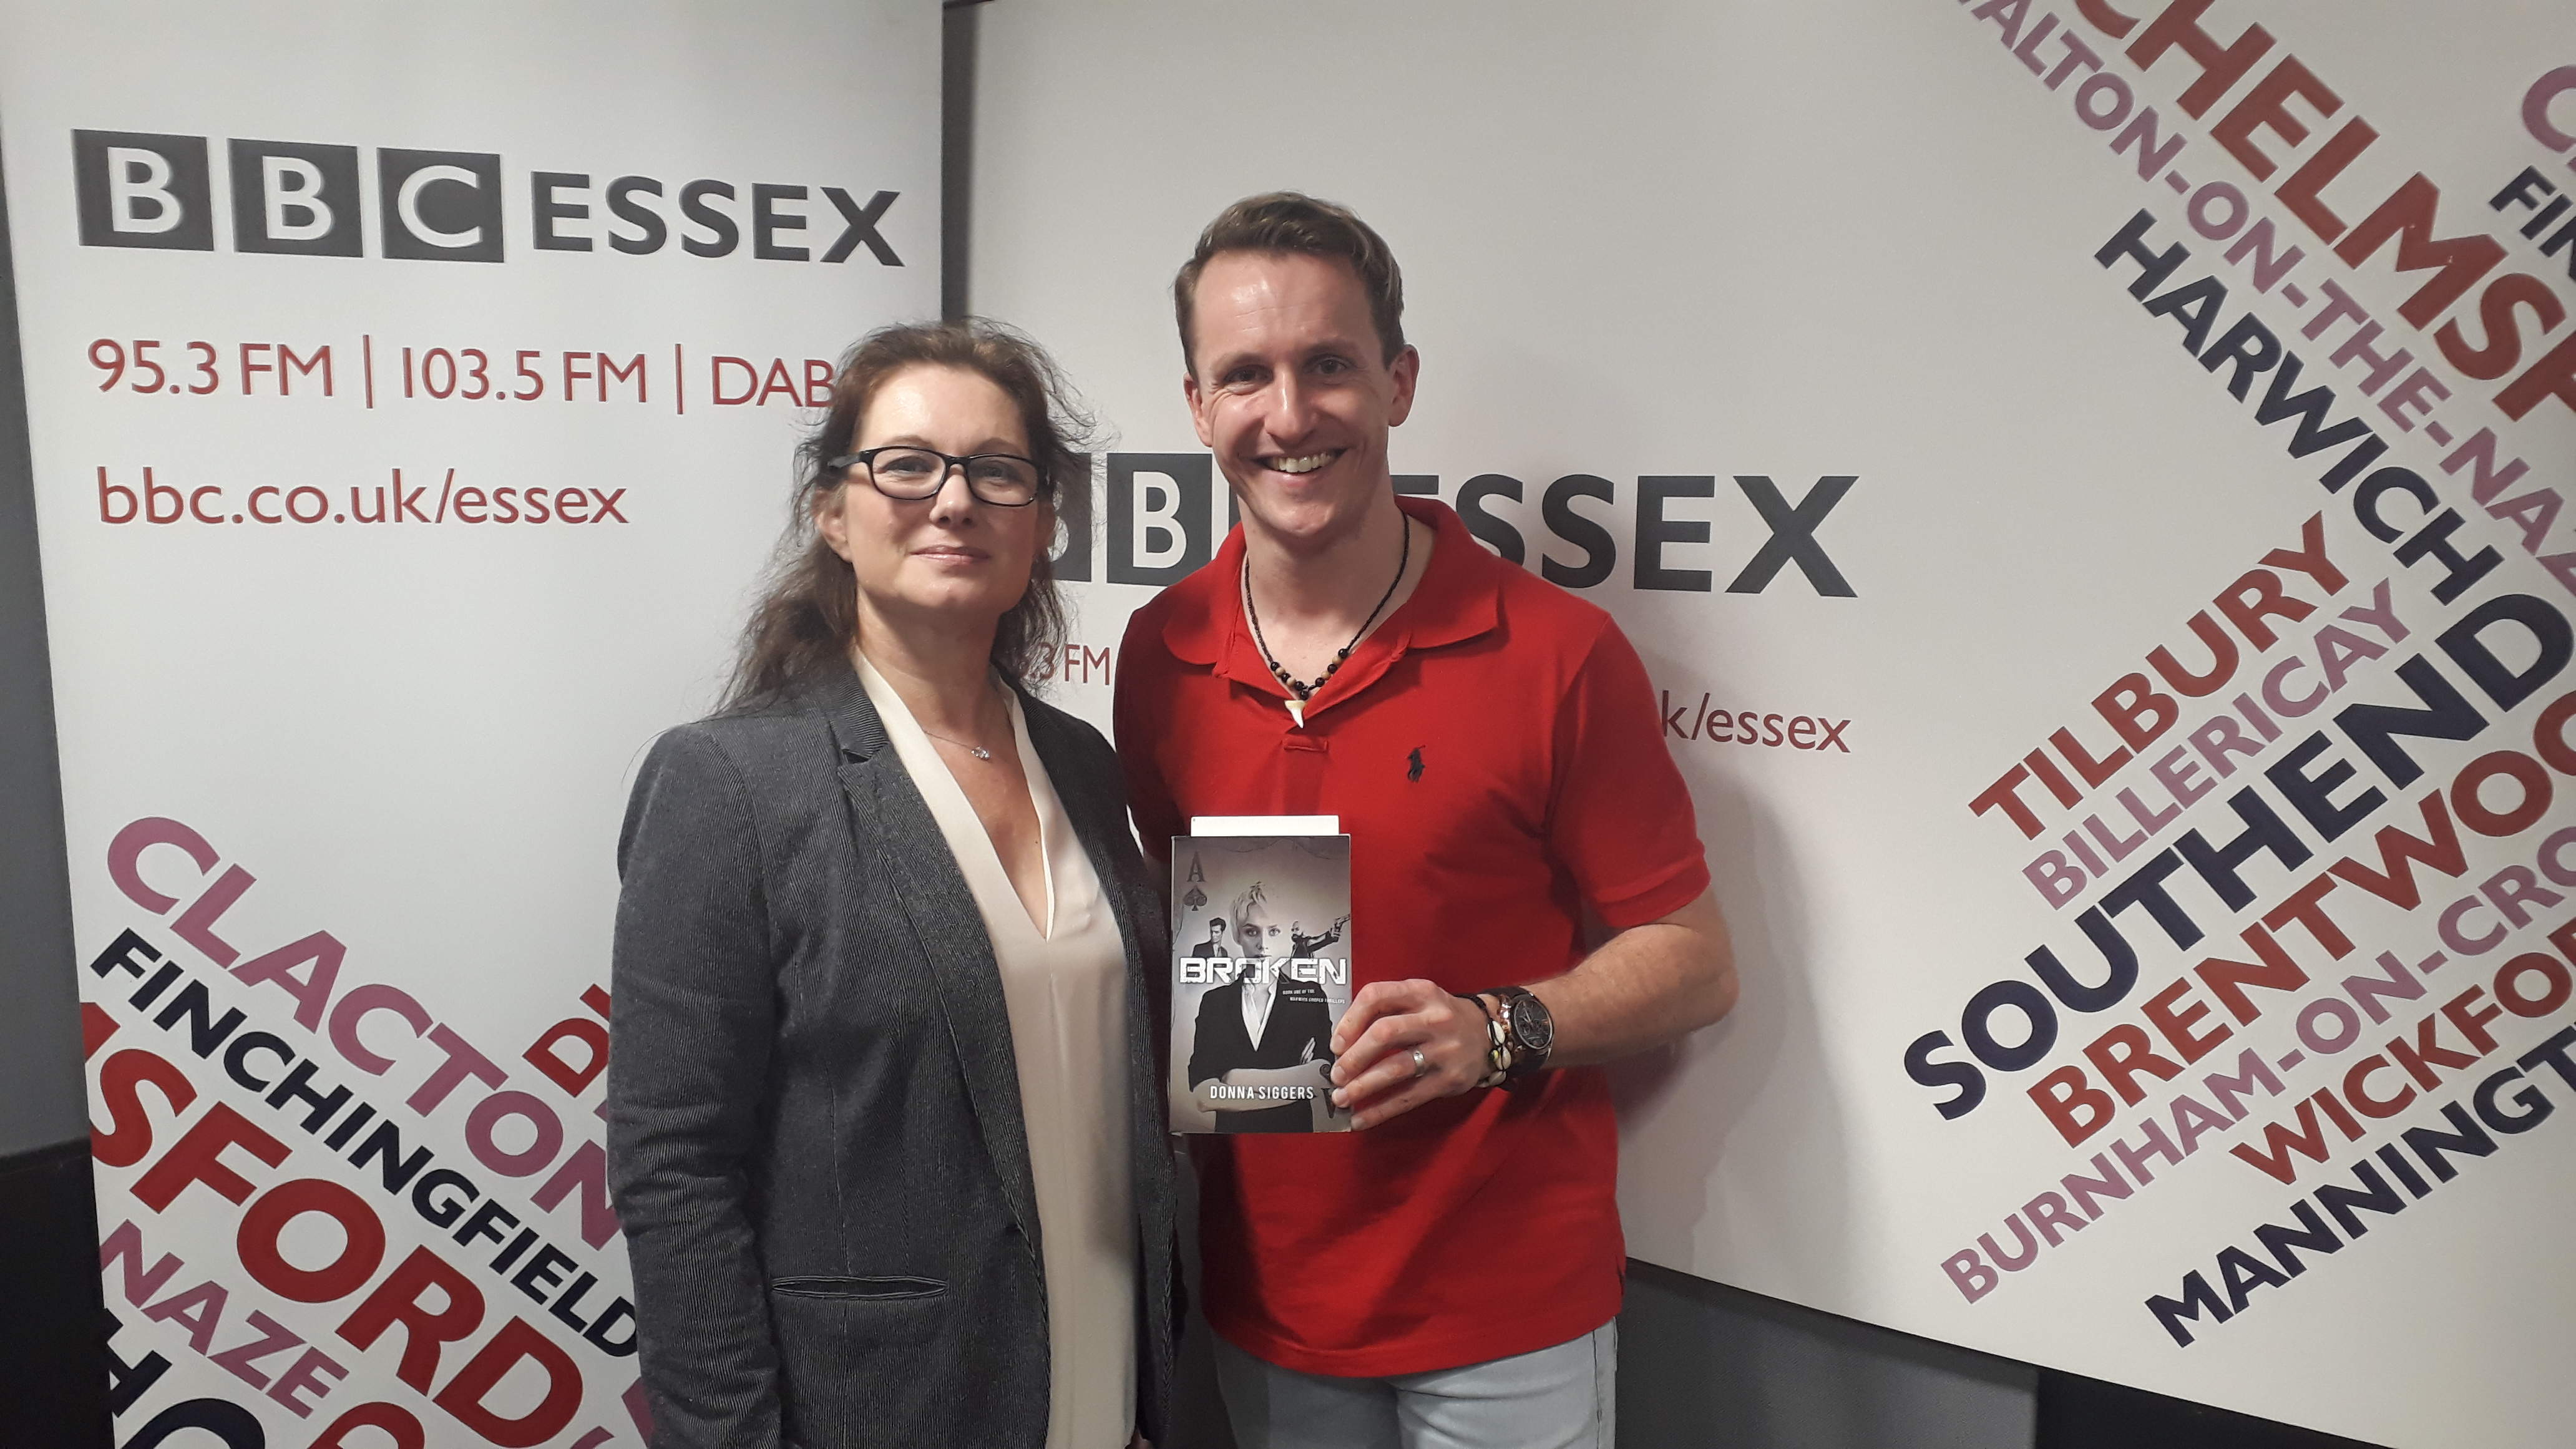 BBC Essex radio interview talking books and life events